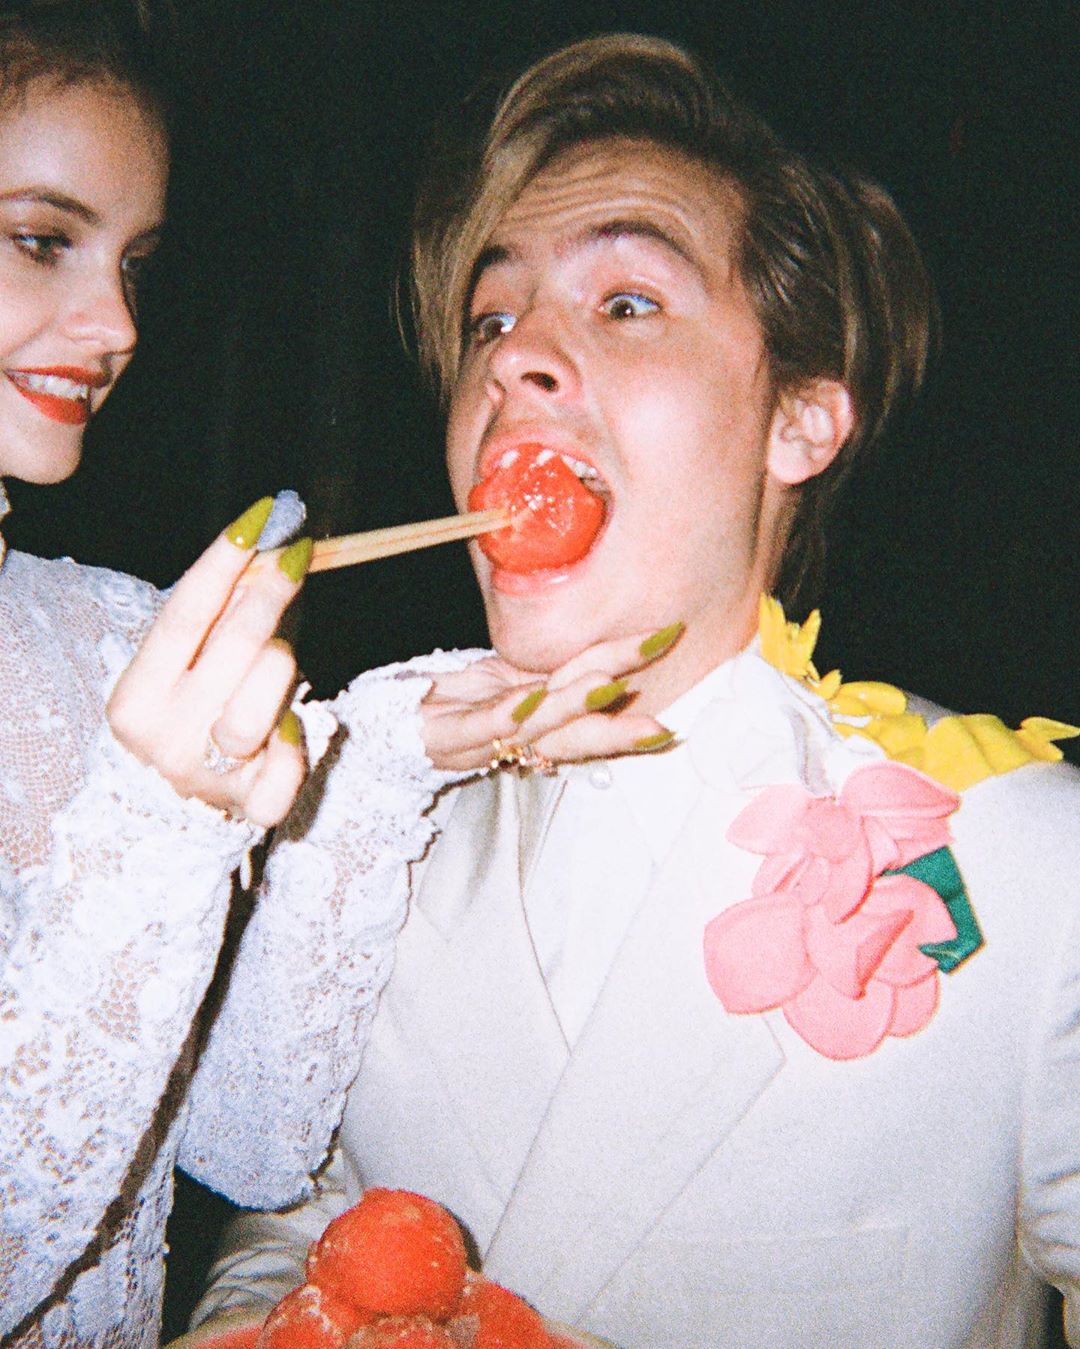 Barbara Palvin et Dylan Sprouse hit the Cover! - Photo 20